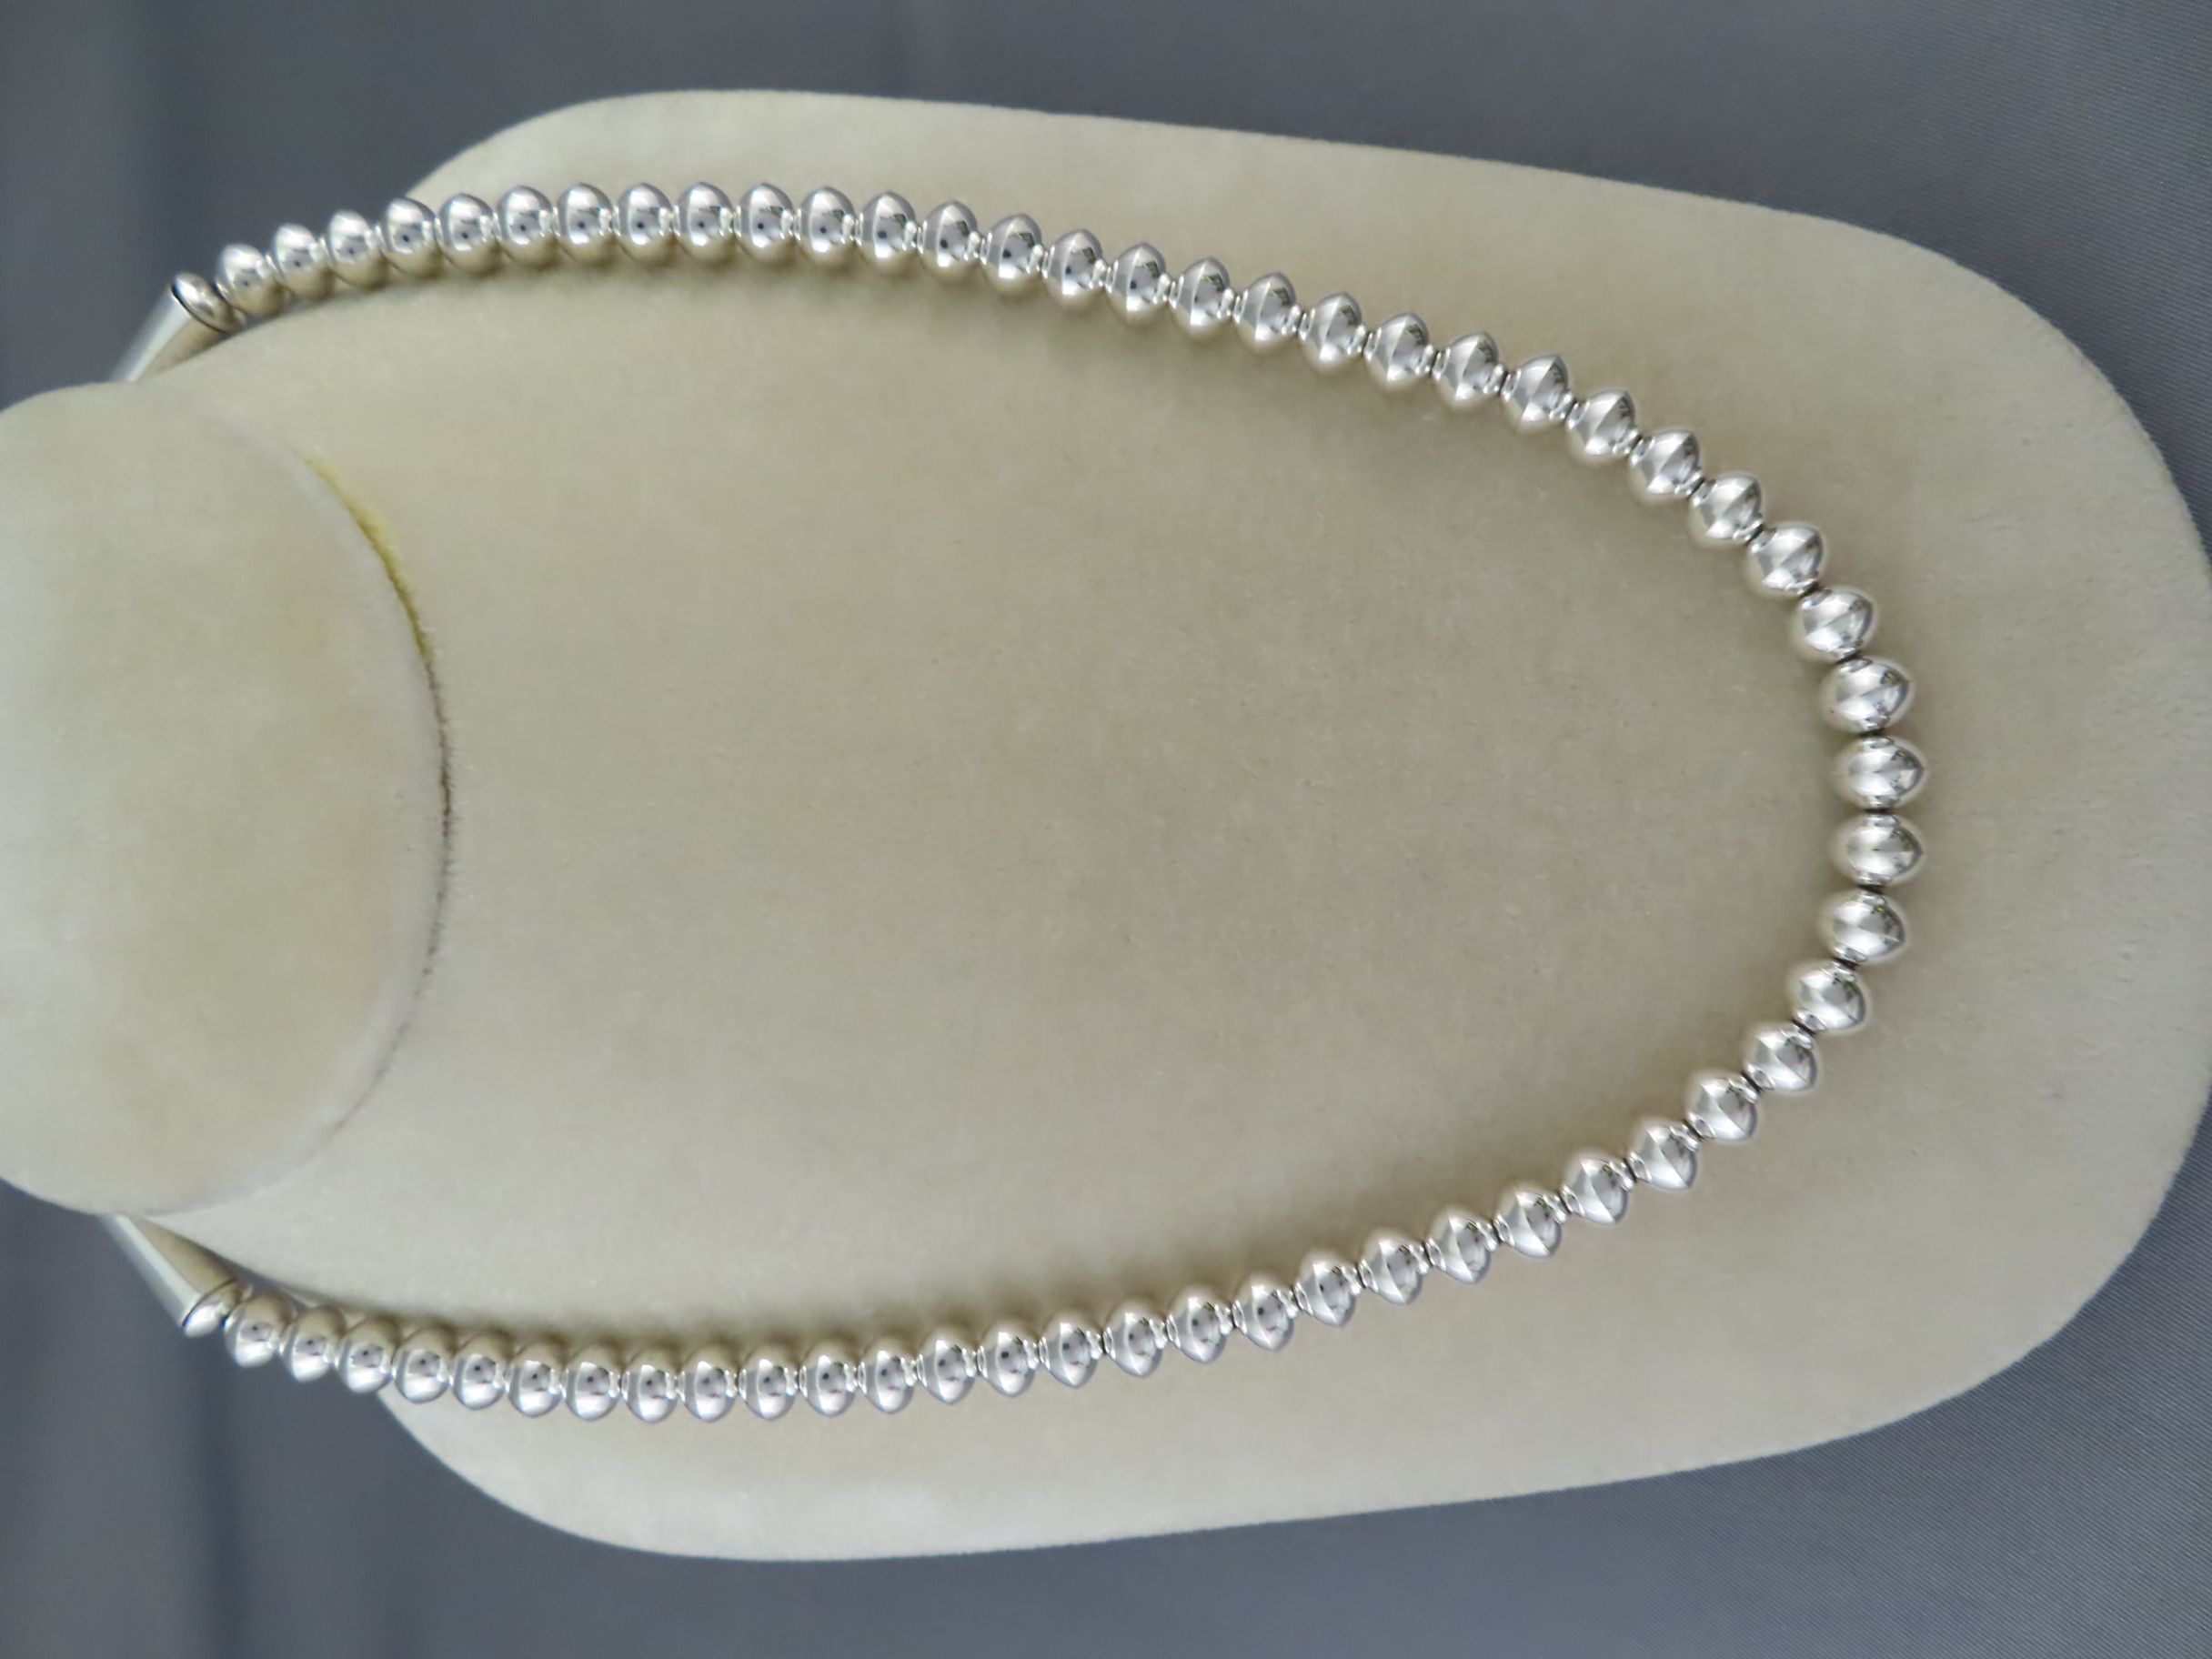 Navajo Pearls - Sterling Silver Navajo Pearls Bead Necklace by Native American (Navajo) jewelry artist, Artie Yellowhorse $855- FOR SALE